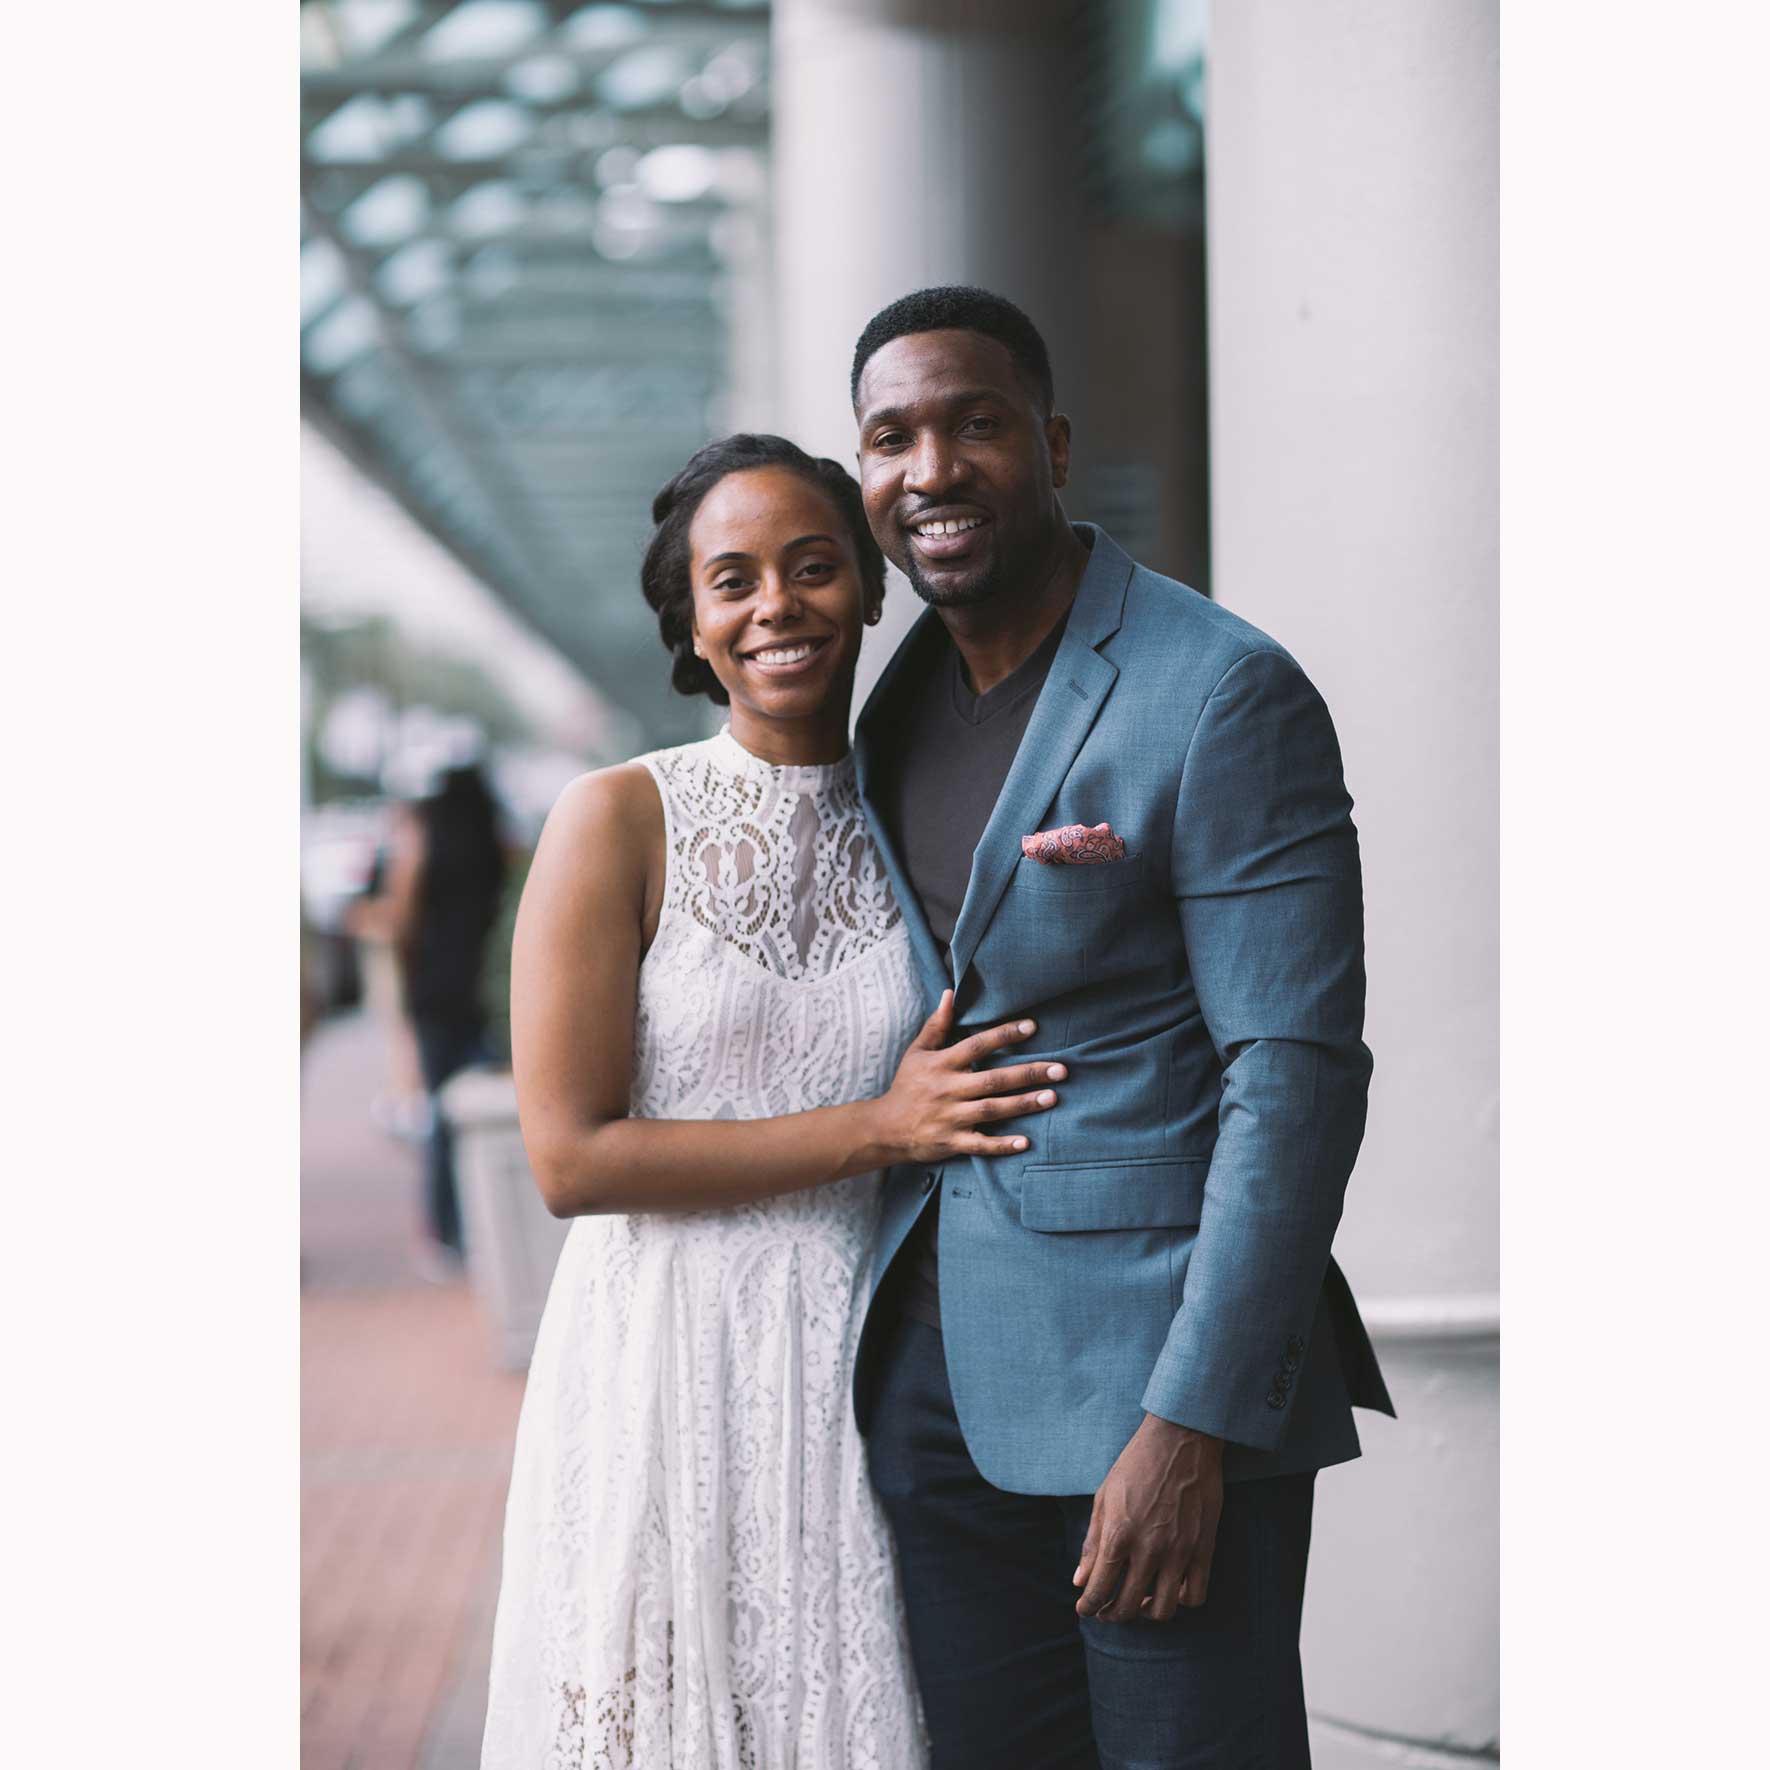 9 incredibly Adorable Couples We Spotted Strolling Through New Orleans
